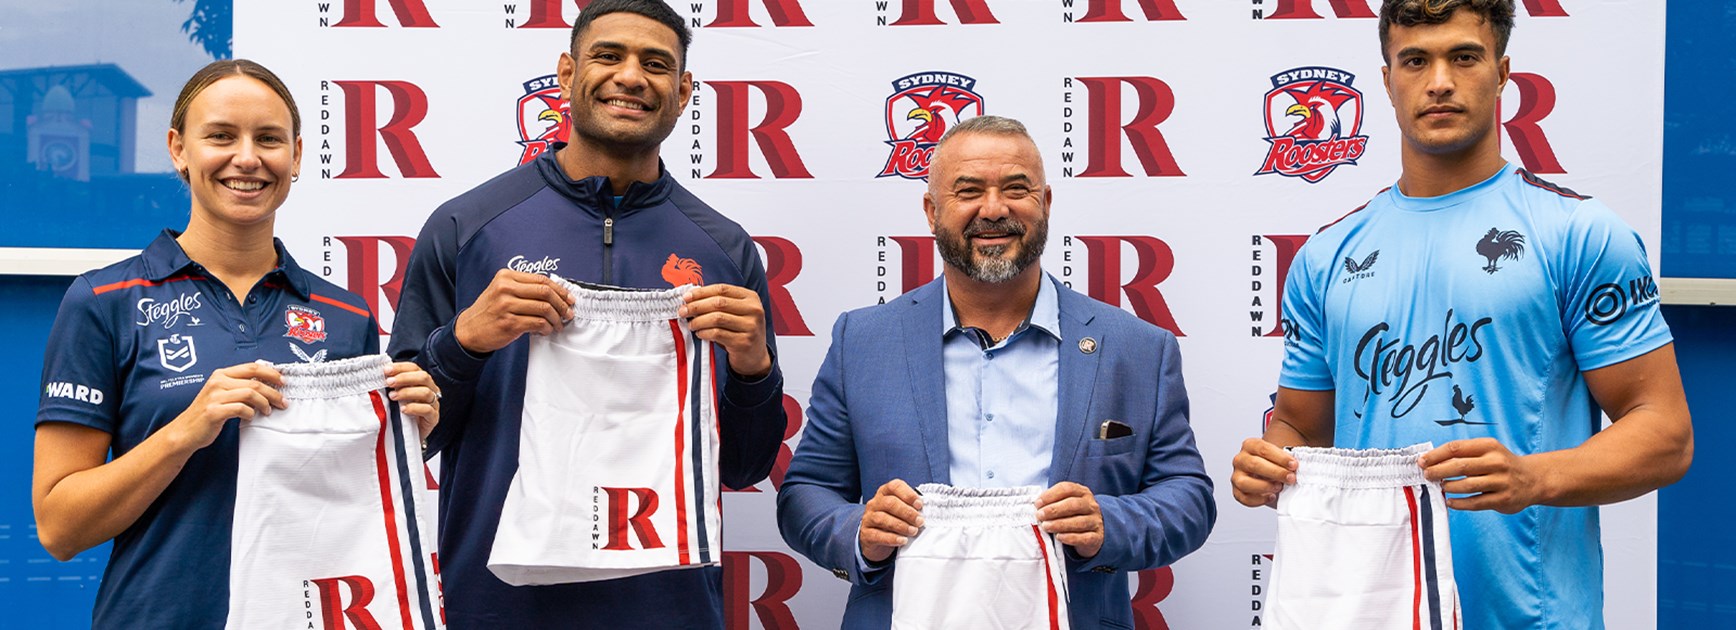 Reddawn Australia Partners With Sydney Roosters